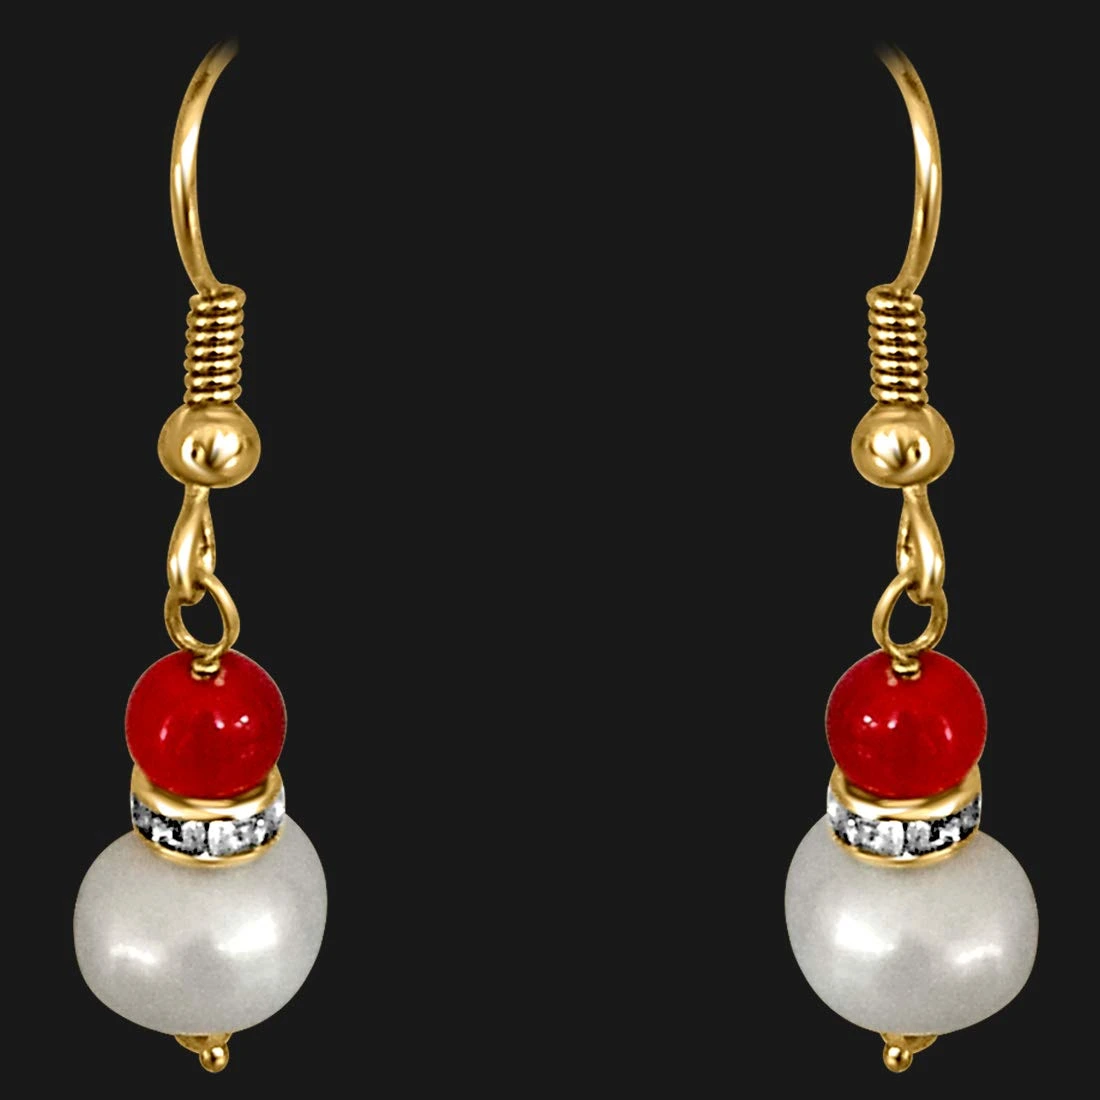 Real Big Pearl & Red Stone Earrings for Women (SE210)